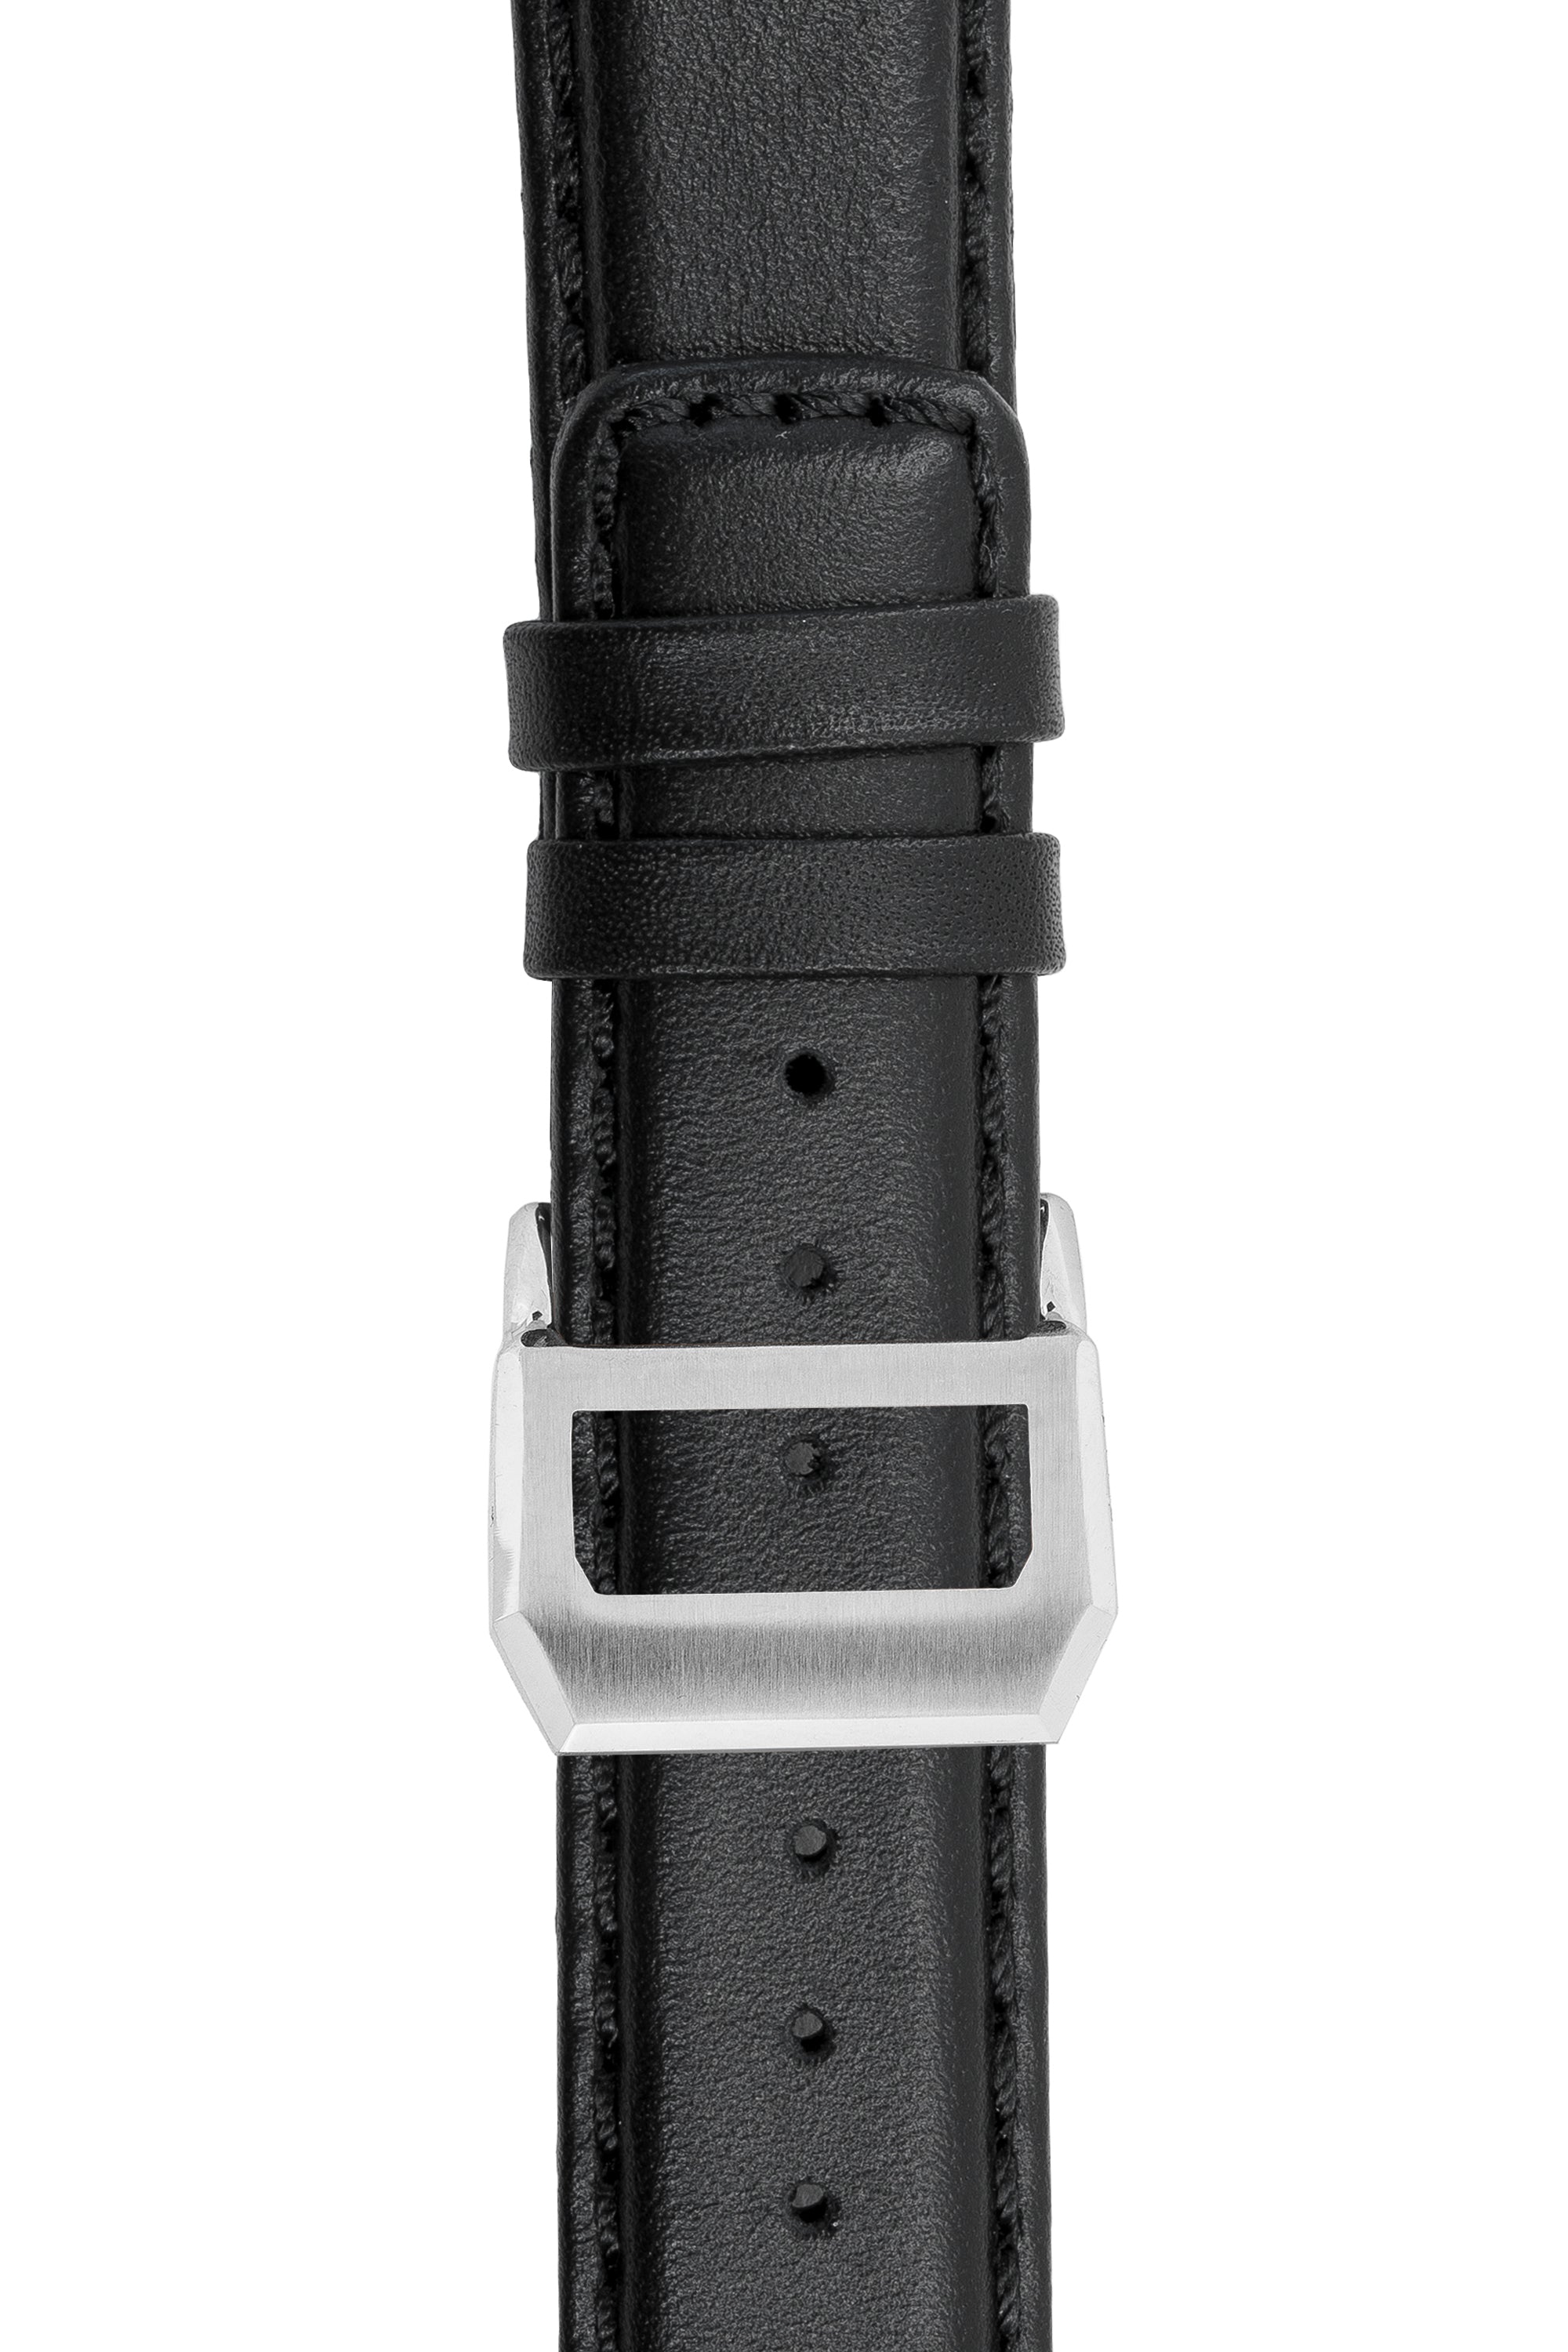 IWC-Style Calf Leather Watch Strap in BLACK | WatchObsession